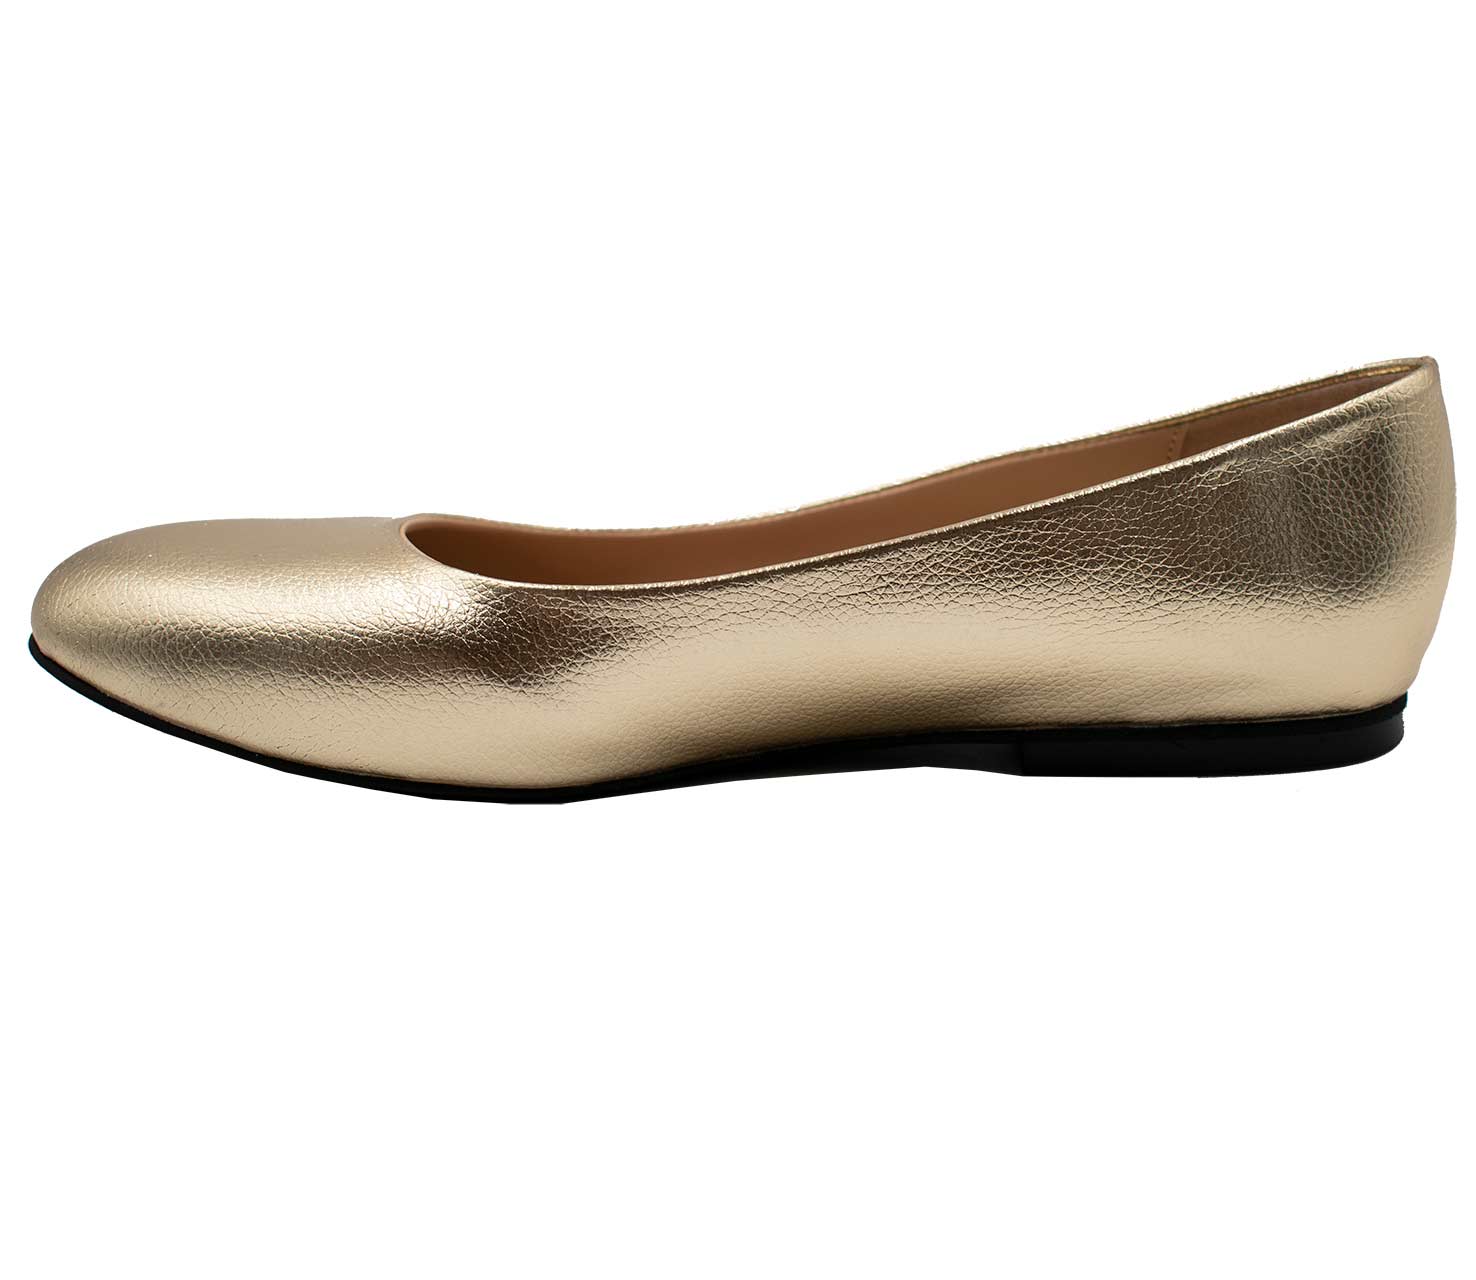 ViceVersa Liz - Gold Patent in Shoes & Flats - $69.99